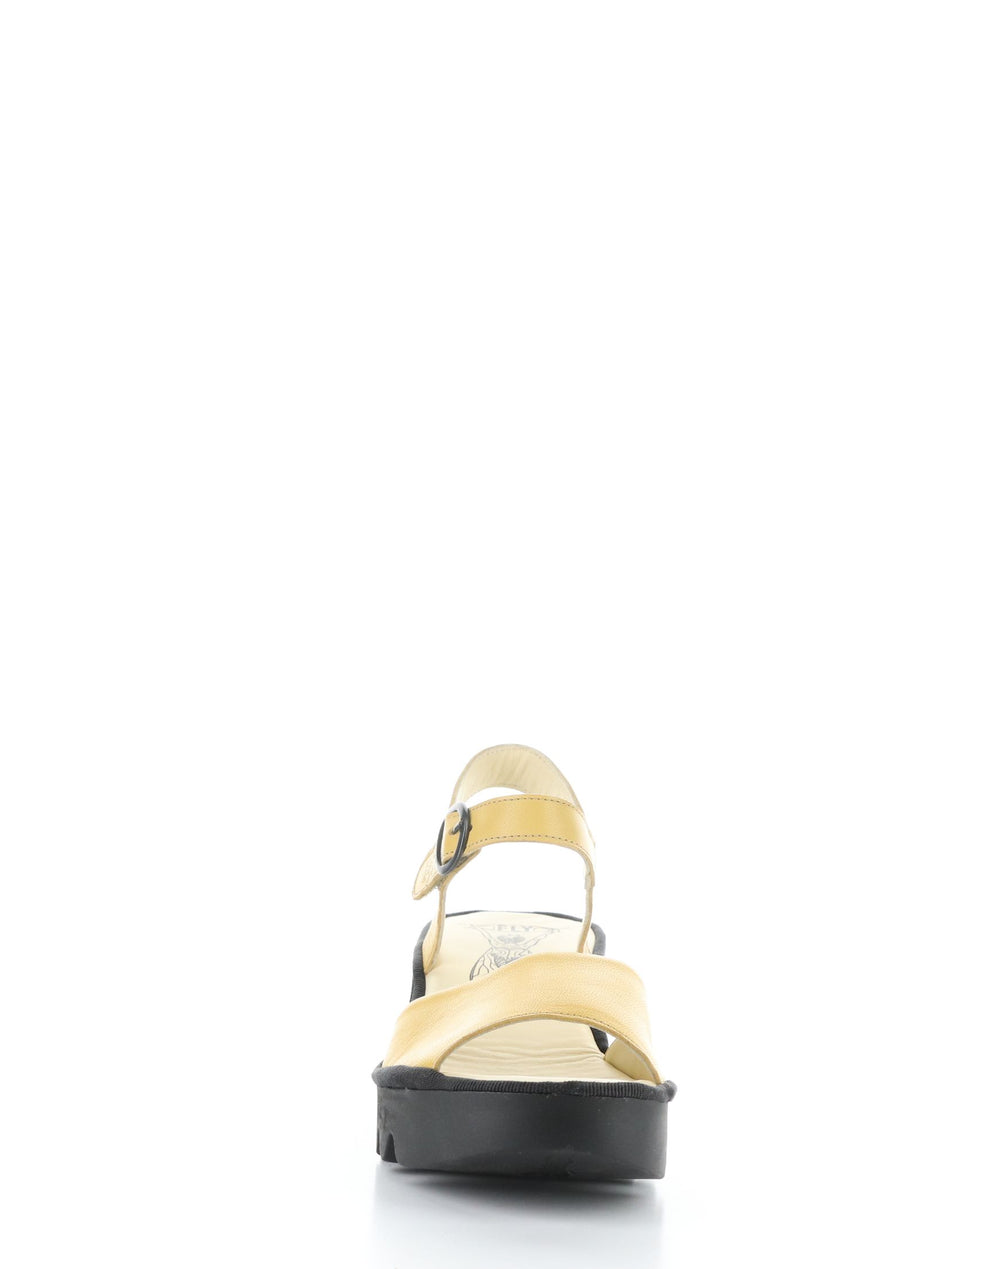 TULL503FLY 004 BUMBLEBEE Velcro Sandals